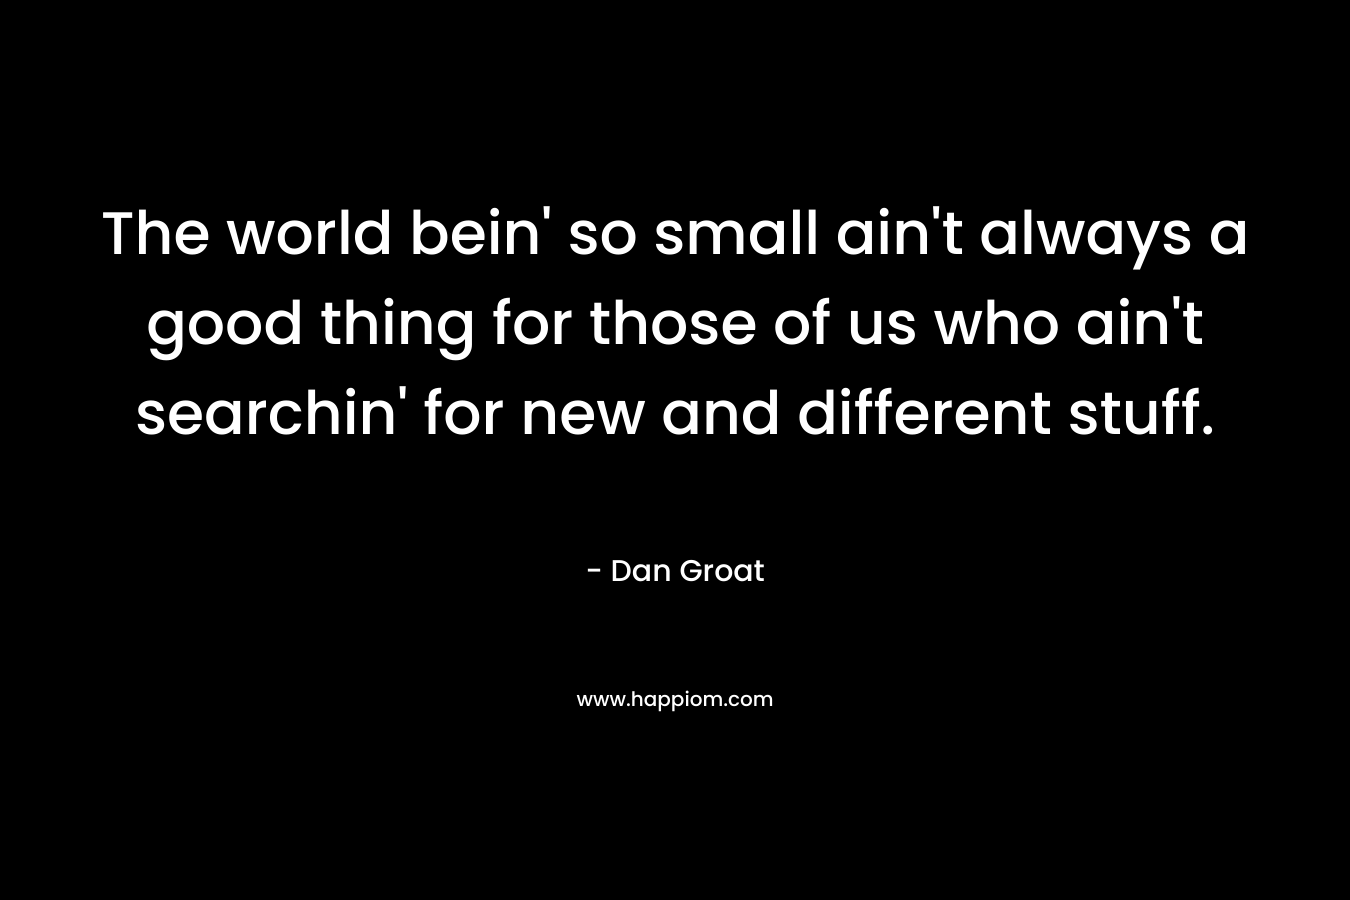 The world bein’ so small ain’t always a good thing for those of us who ain’t searchin’ for new and different stuff. – Dan Groat